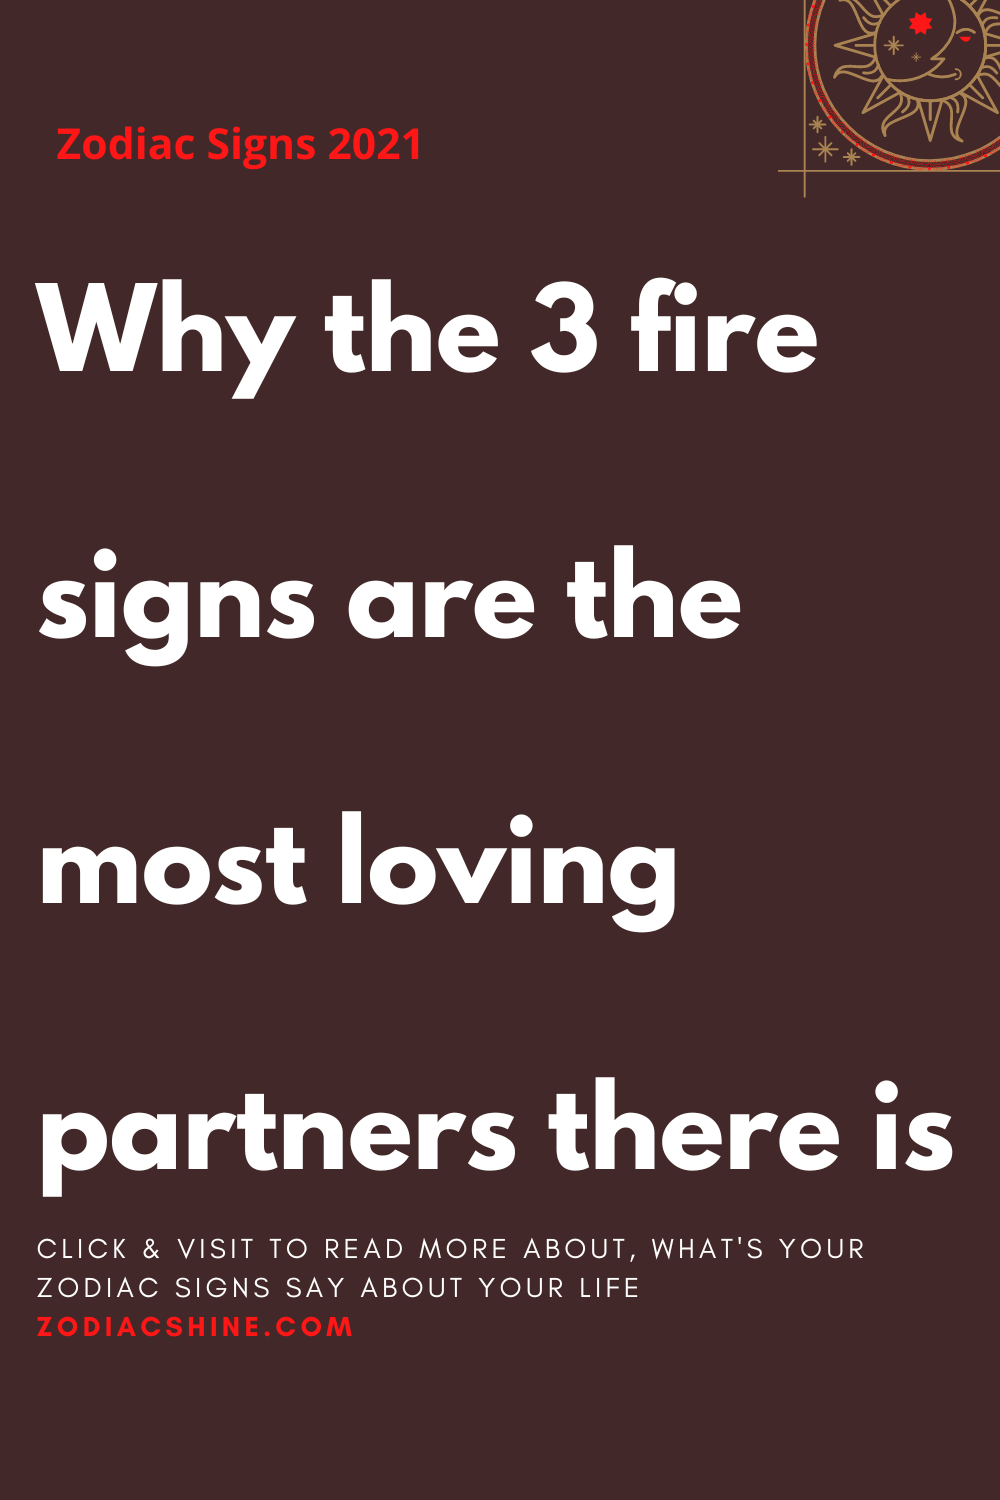 Why the 3 fire signs are the most loving partners there is